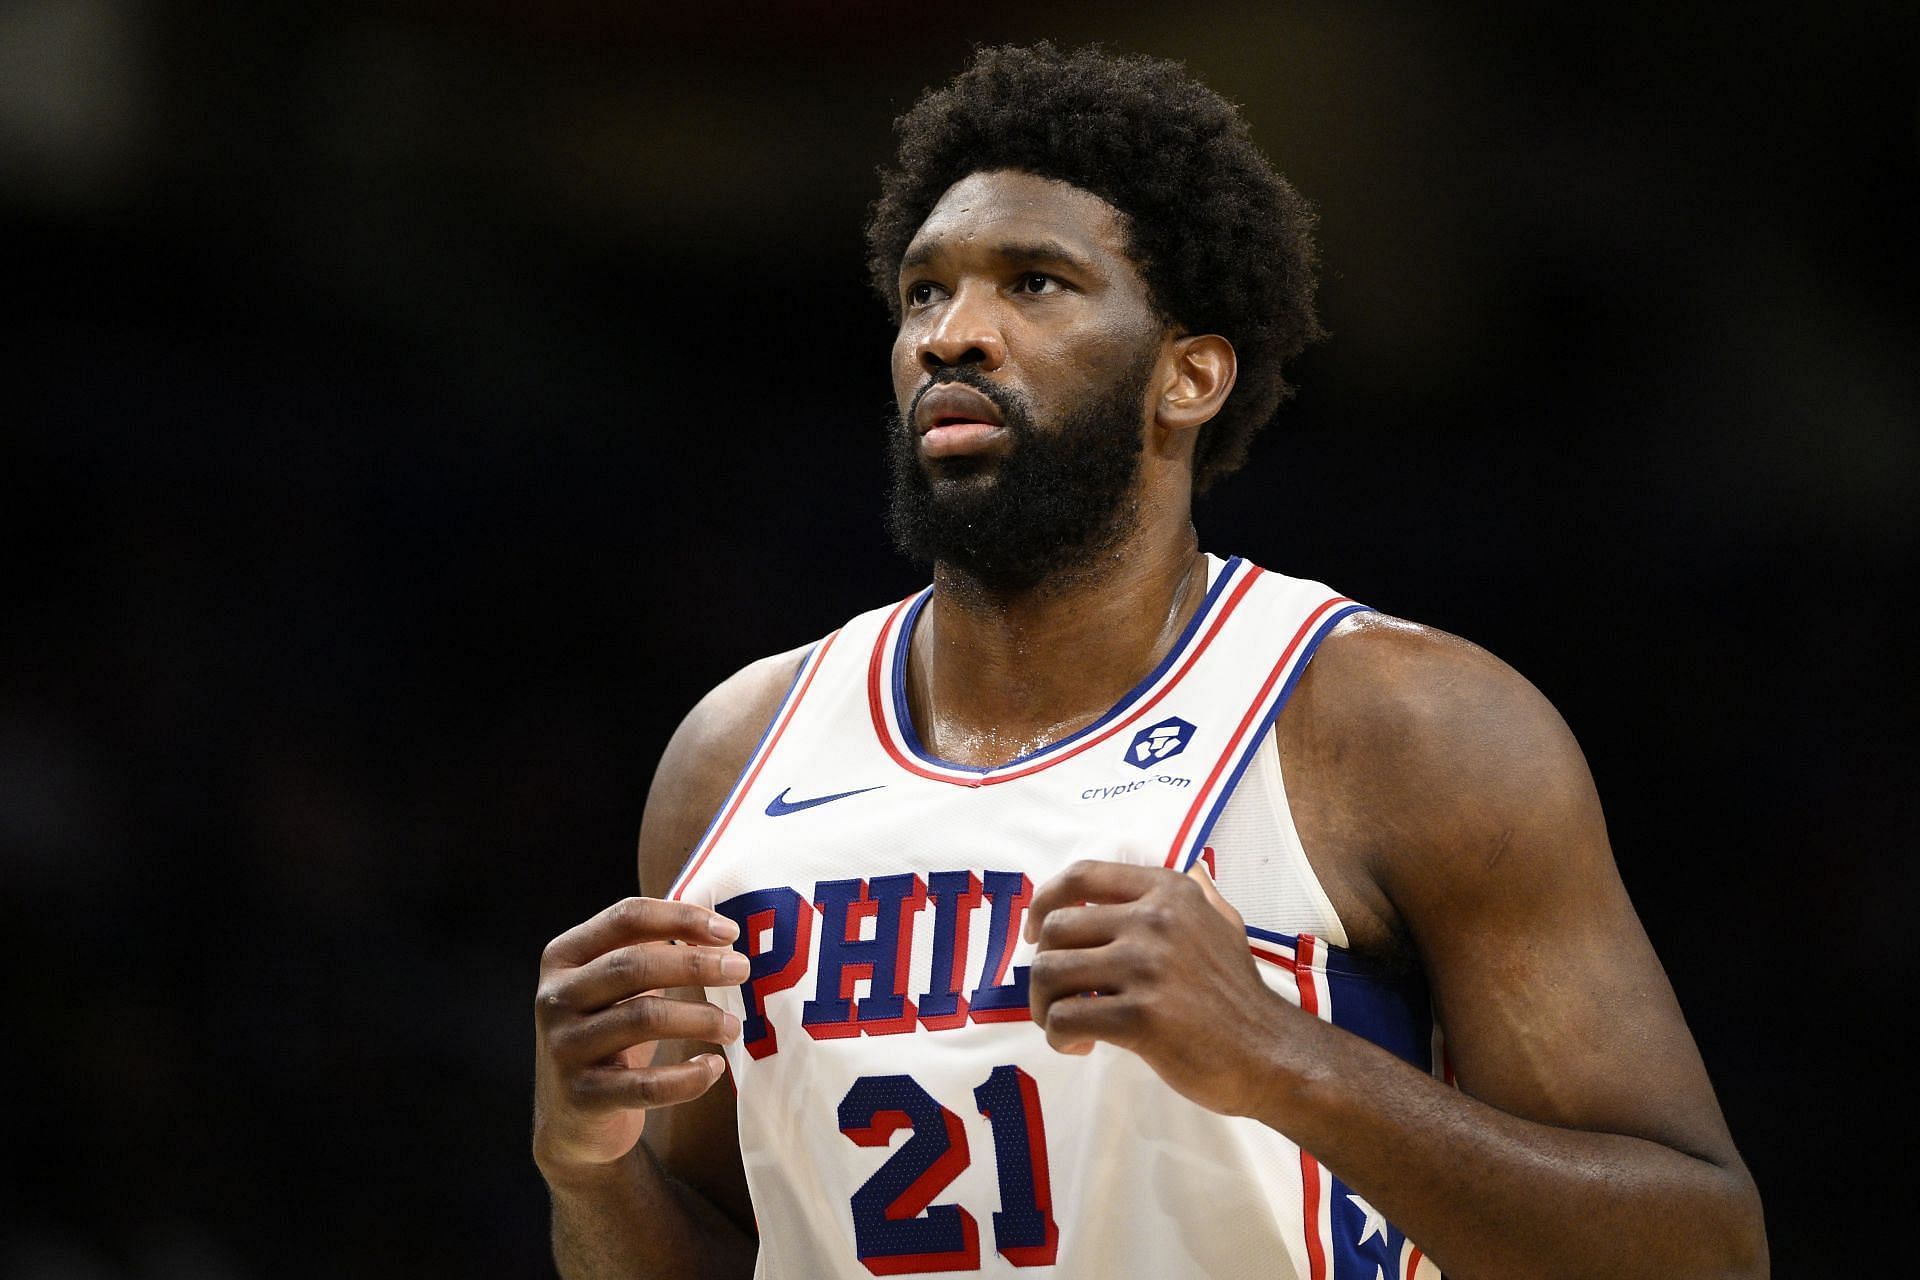 When is Joel Embiid coming back from injury?